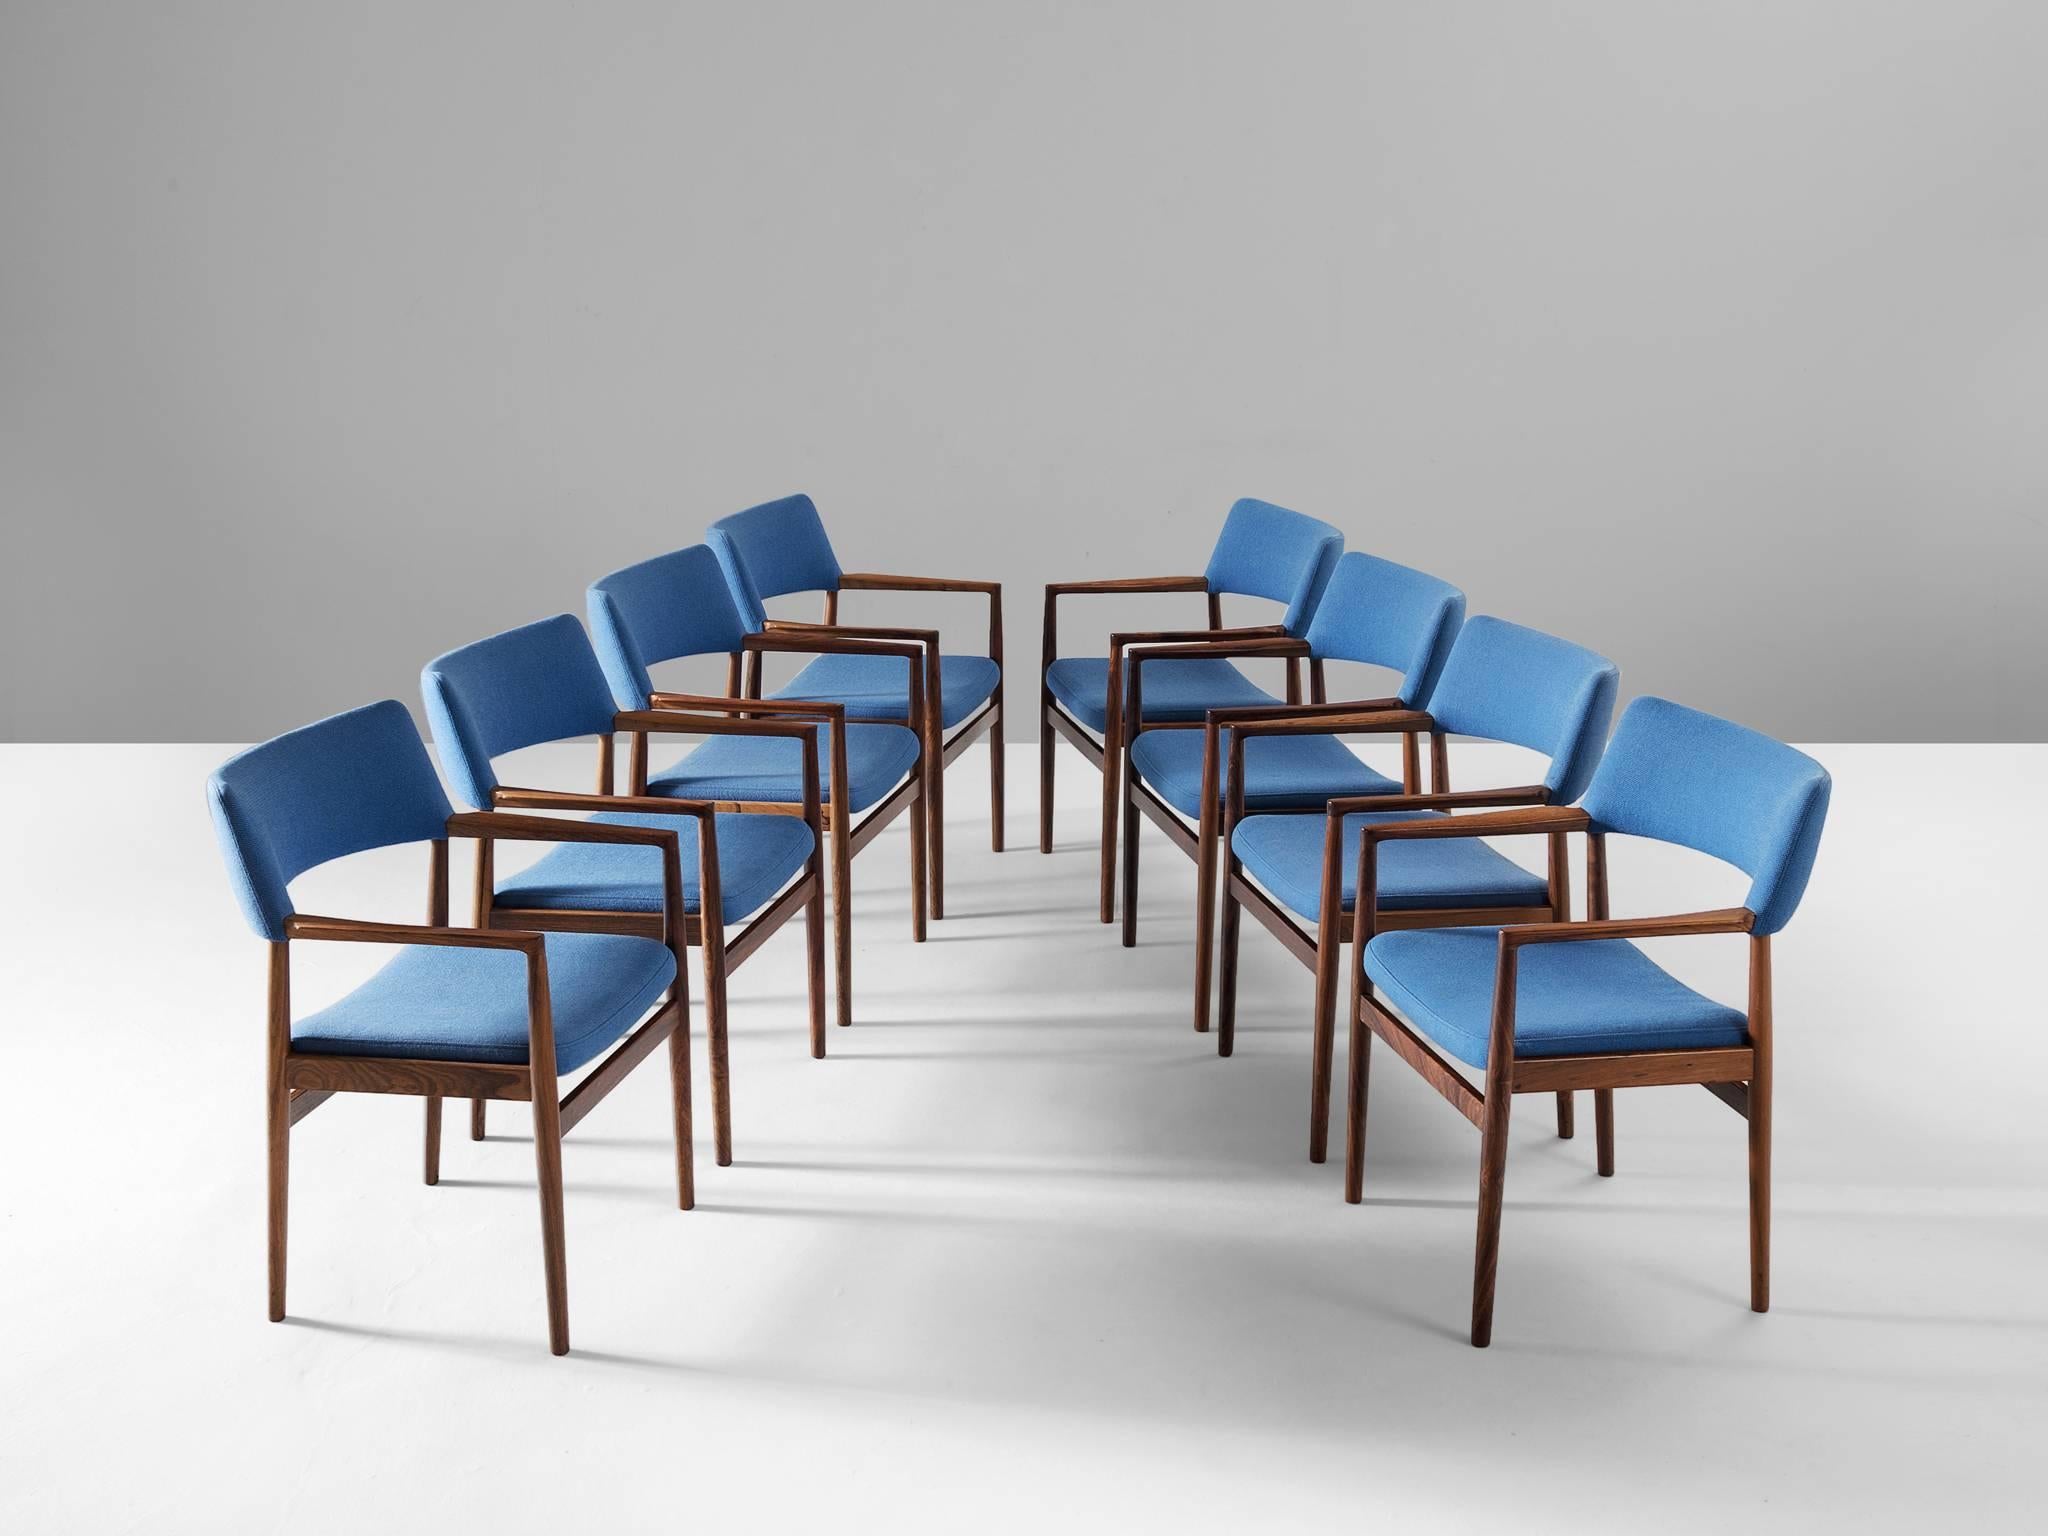 Set of Eight dining chairs, in rosewood an fabric, Scandinavian 1960s.

Beautiful set of eight armchairs with stunning blue upholstery and rosewood frame. These elegant chairs have a simplistic design with straight lines and some subtle curves.